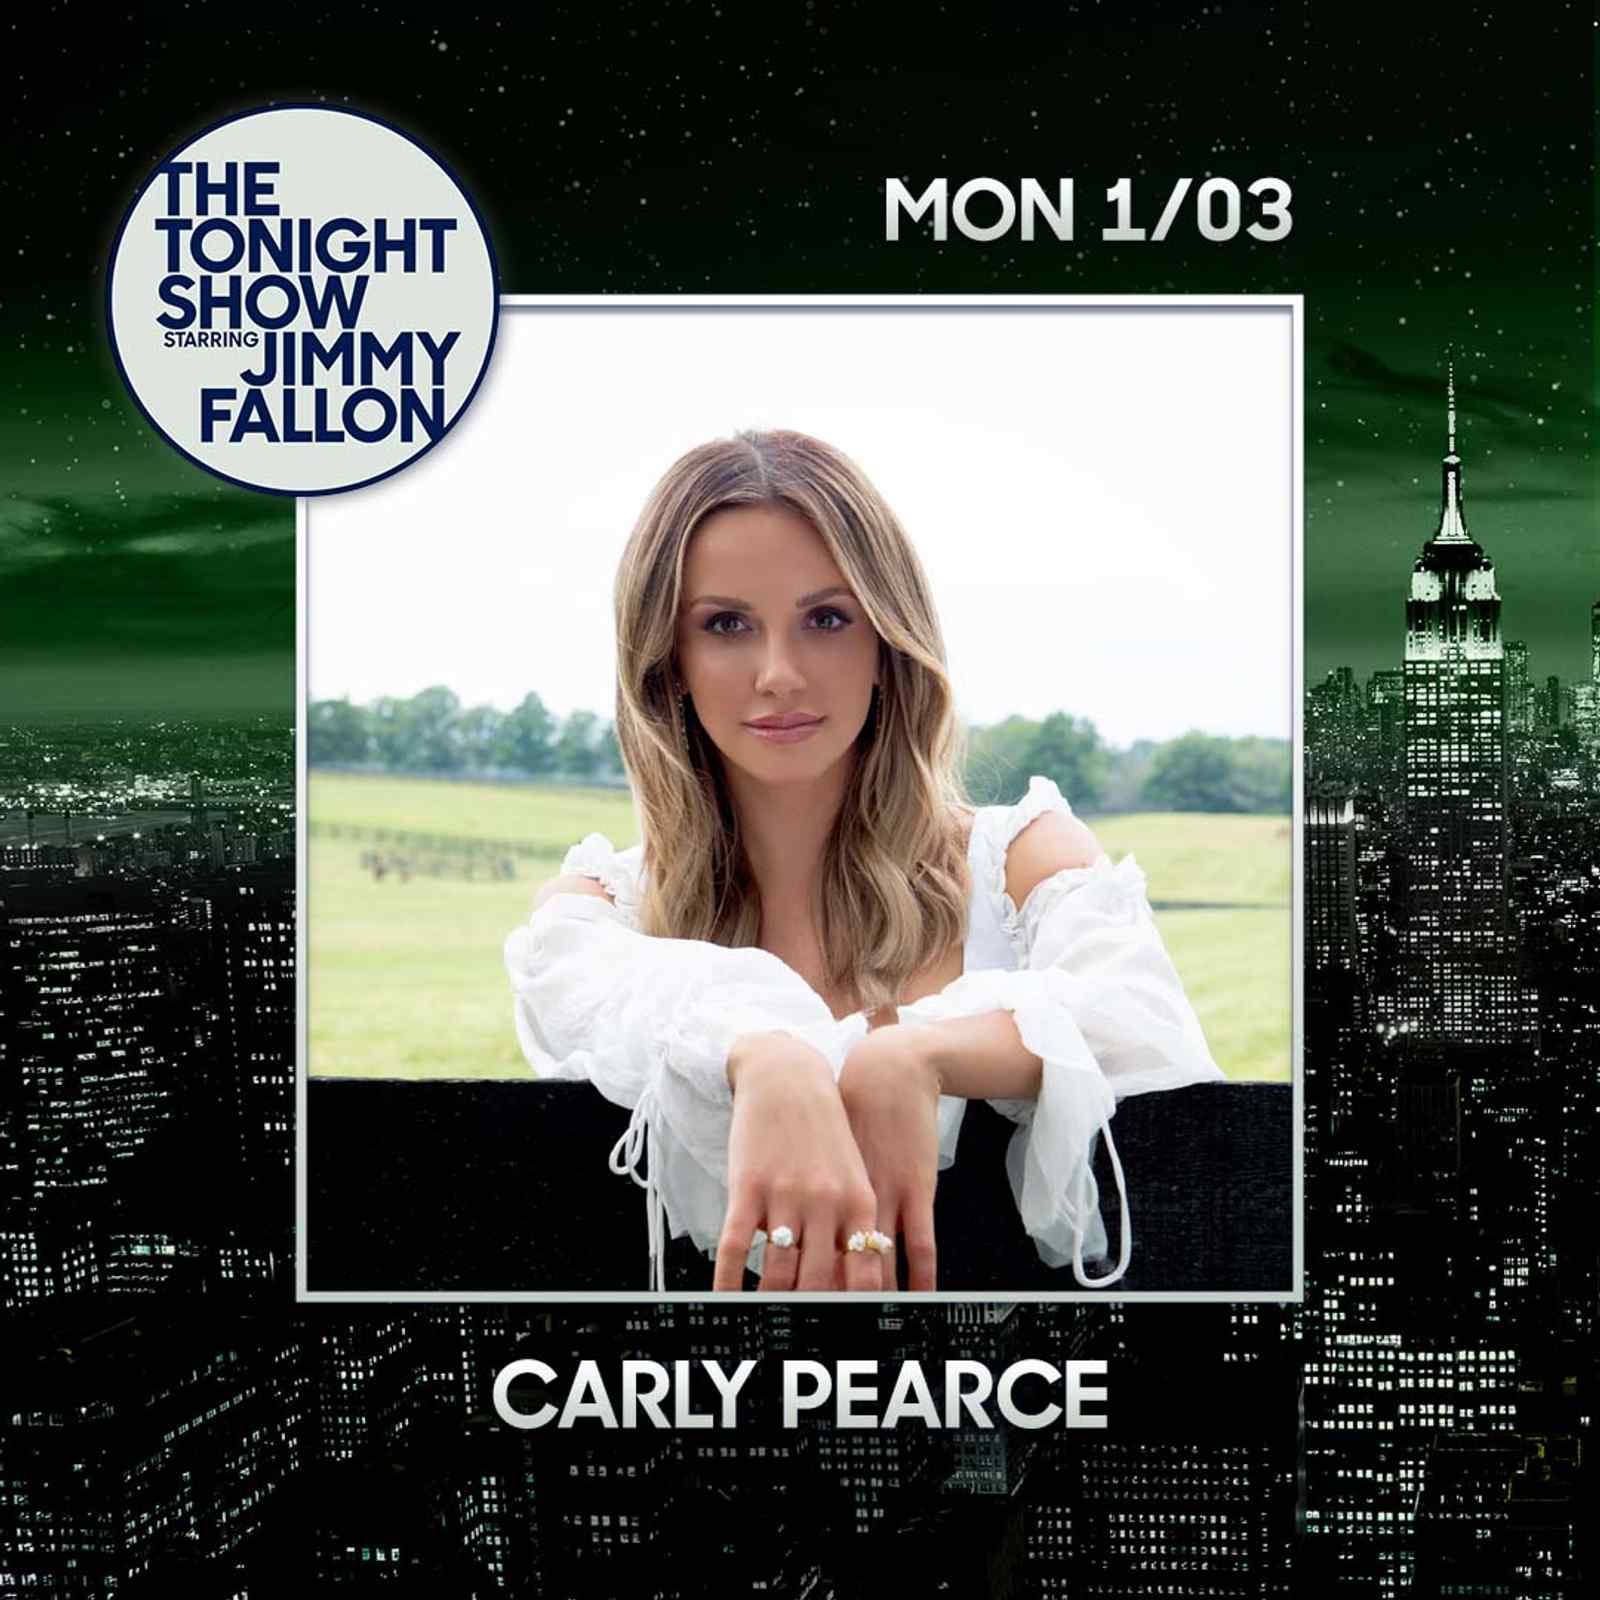 The Tonight Show Starring Jimmy Fallon: Carly Pearce